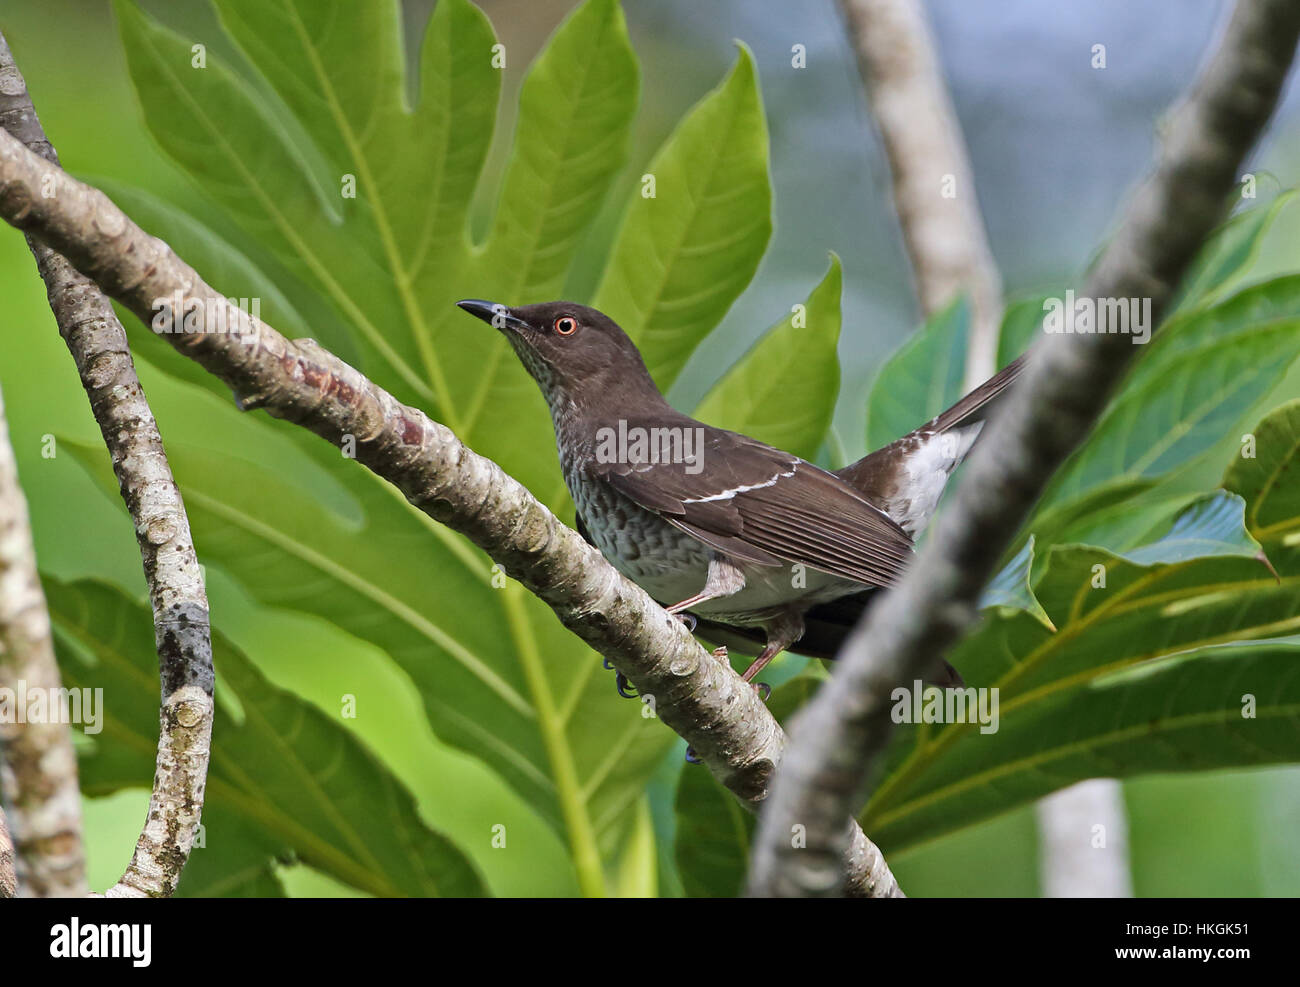 Scaly-breasted Thrasher (Margarops fuscus schwartzi) adult perched on branch (endemic sub-species)  Fond Doux plantation, St Lucia, Lesser Antilles    Stock Photo